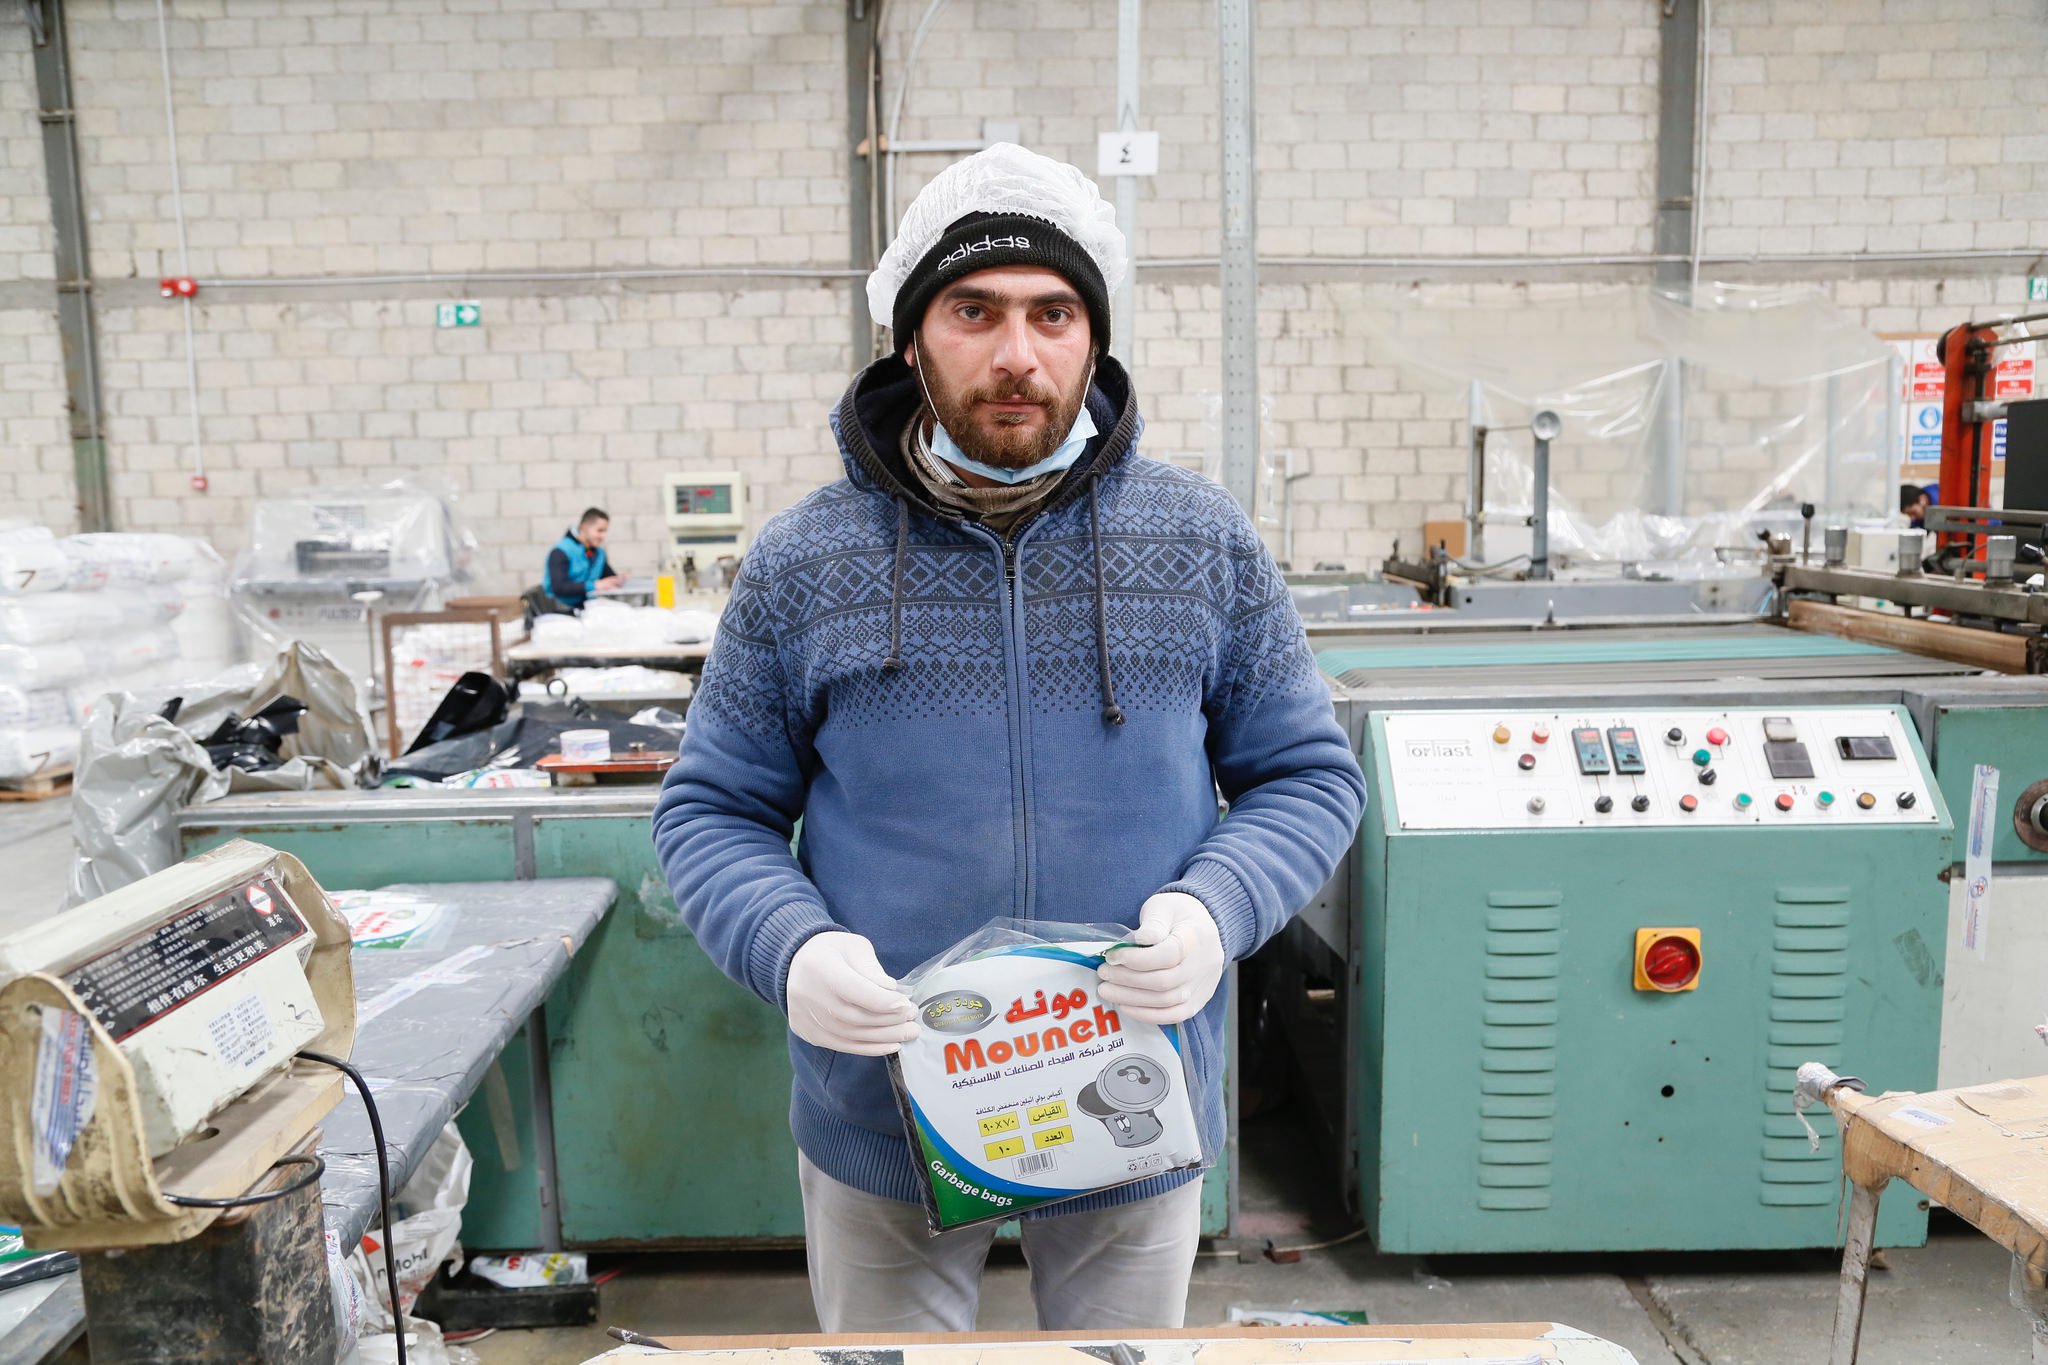 Amer, from Aleppo, Syria, now working in a plastics packaging factory in Amman, Jordan © DFID, 2017